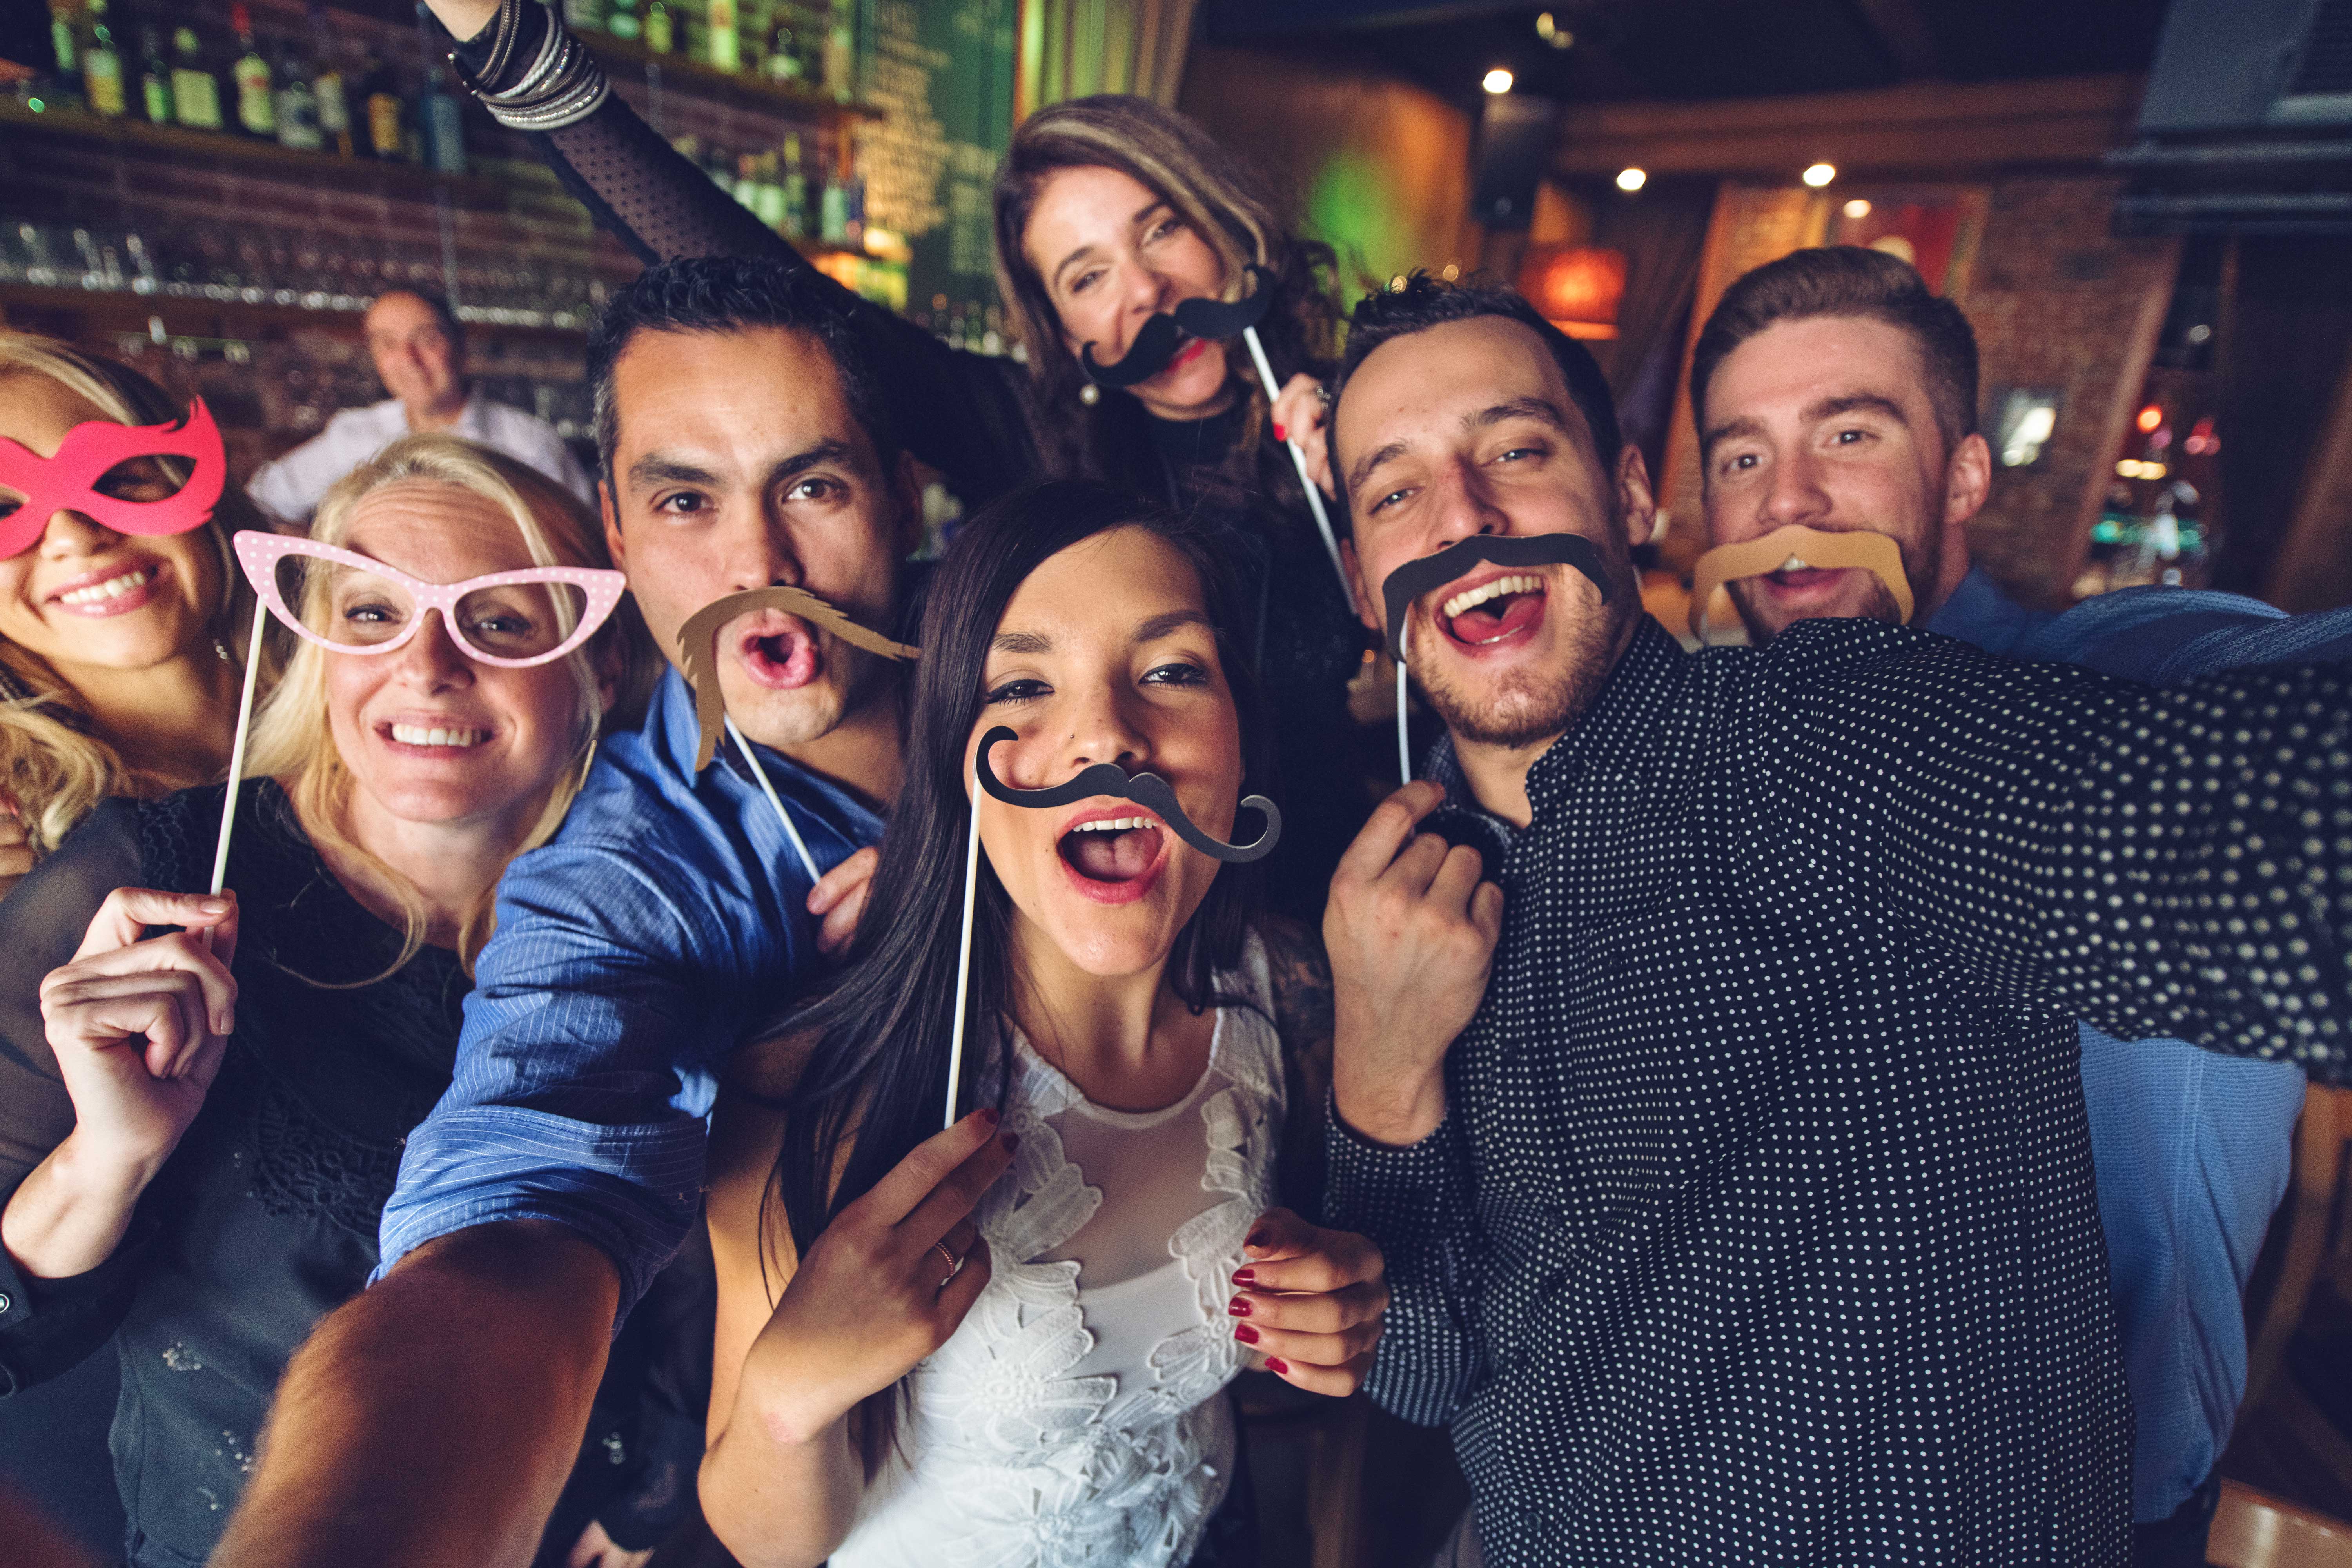 Group posing at an open air photo booth with props in a bar